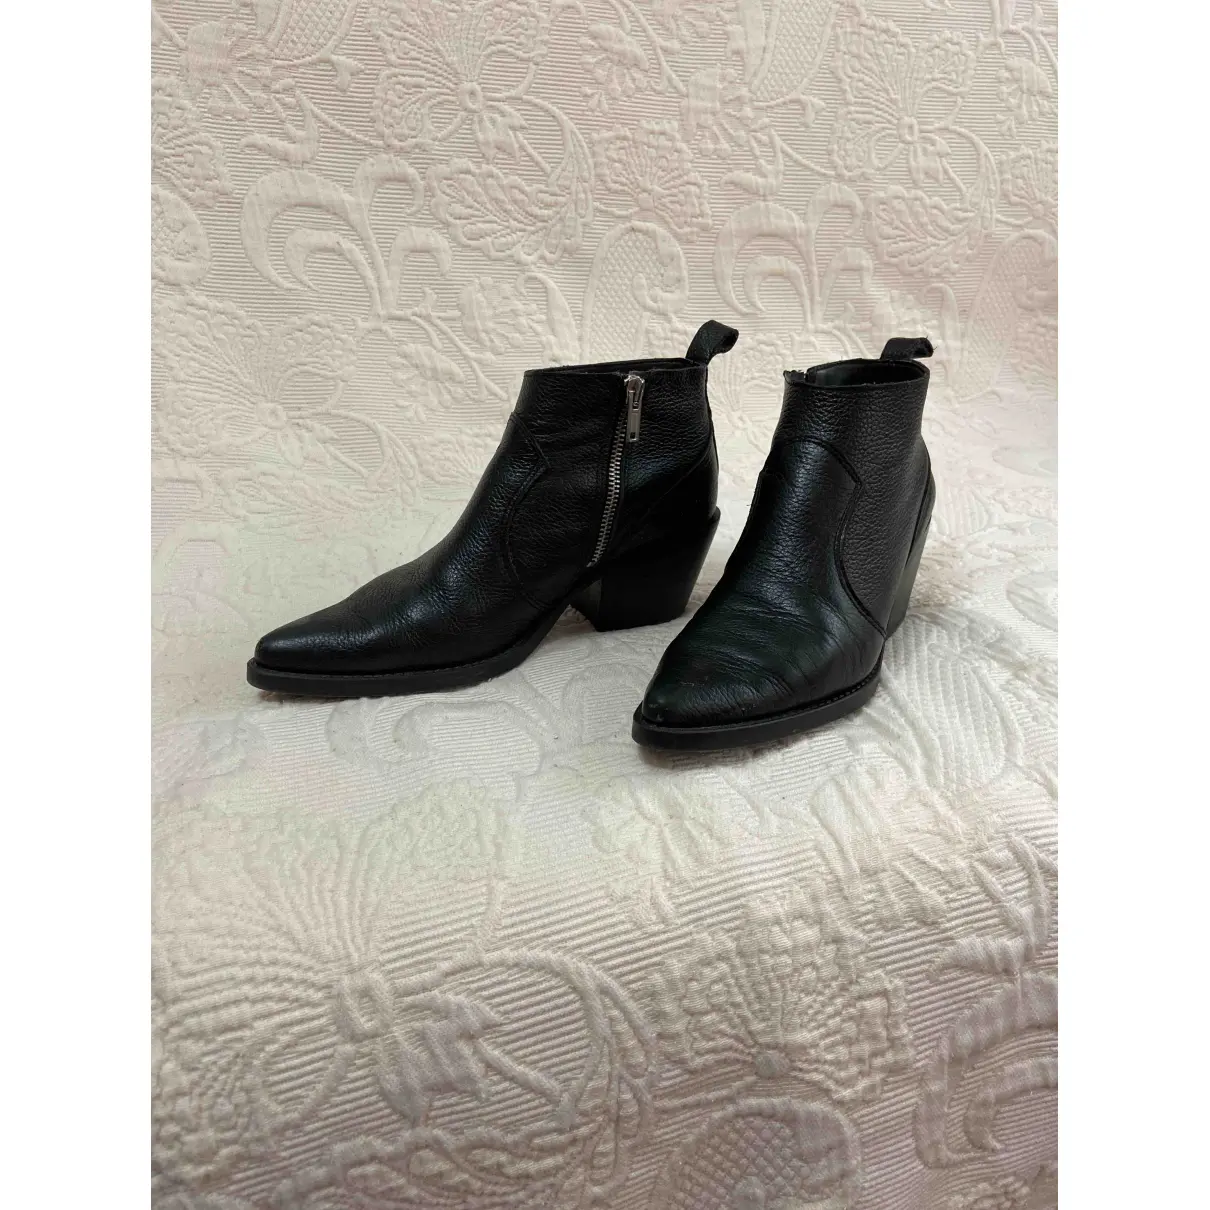 Buy Mango Leather western boots online